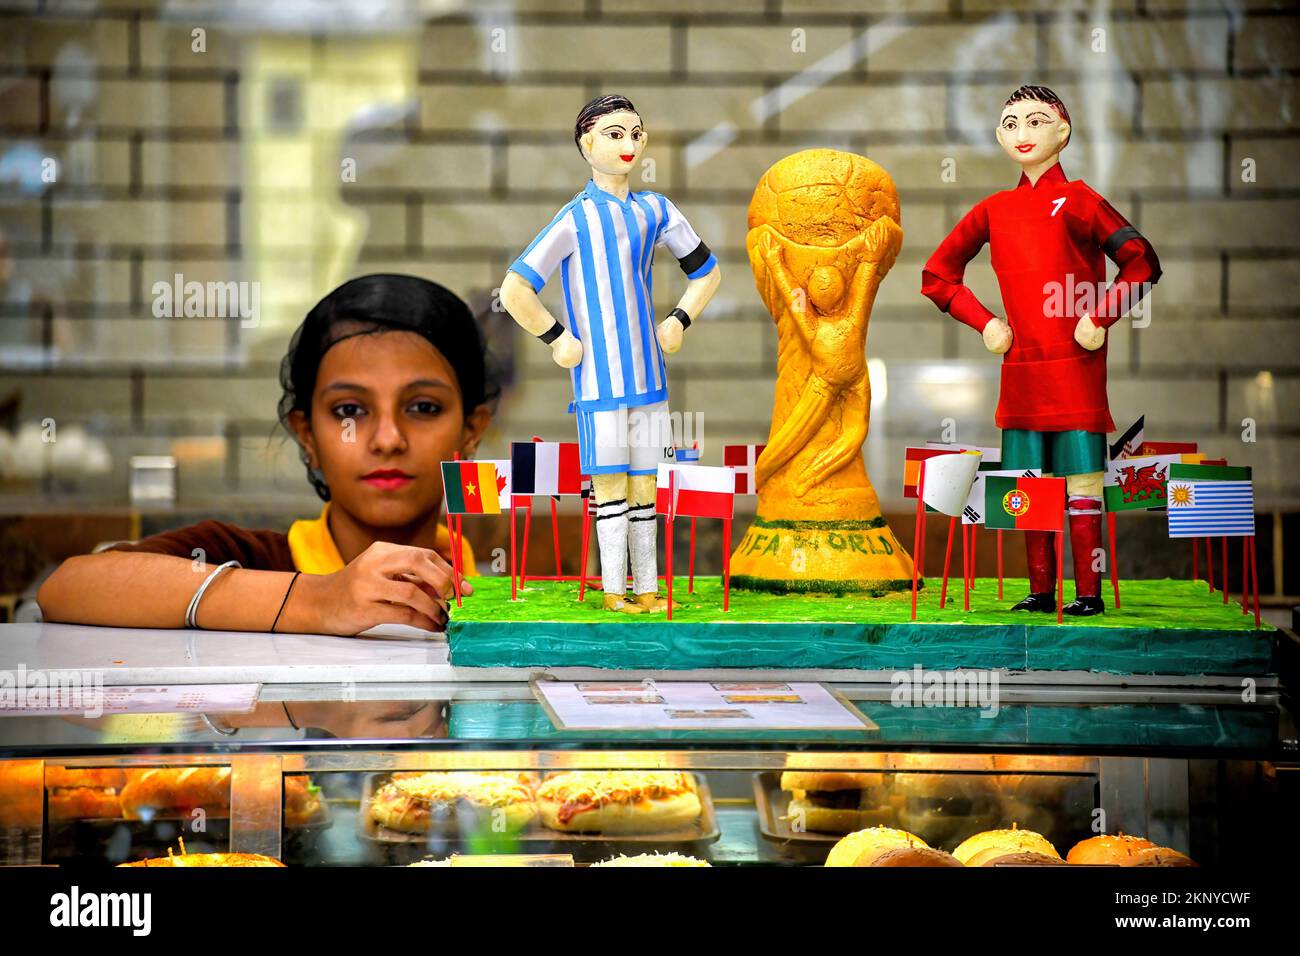 Kolkata, India. 26th Nov, 2022. A worker makes a replica of the FIFA World Cup 2022 trophy with Lionel Messi and Cristiano Ronaldo models made from sweets at a confectionery shop ahead of the FIFA World Cup. (Photo by Avishek Das/SOPA Images/Sipa USA) Credit: Sipa USA/Alamy Live News Stock Photo